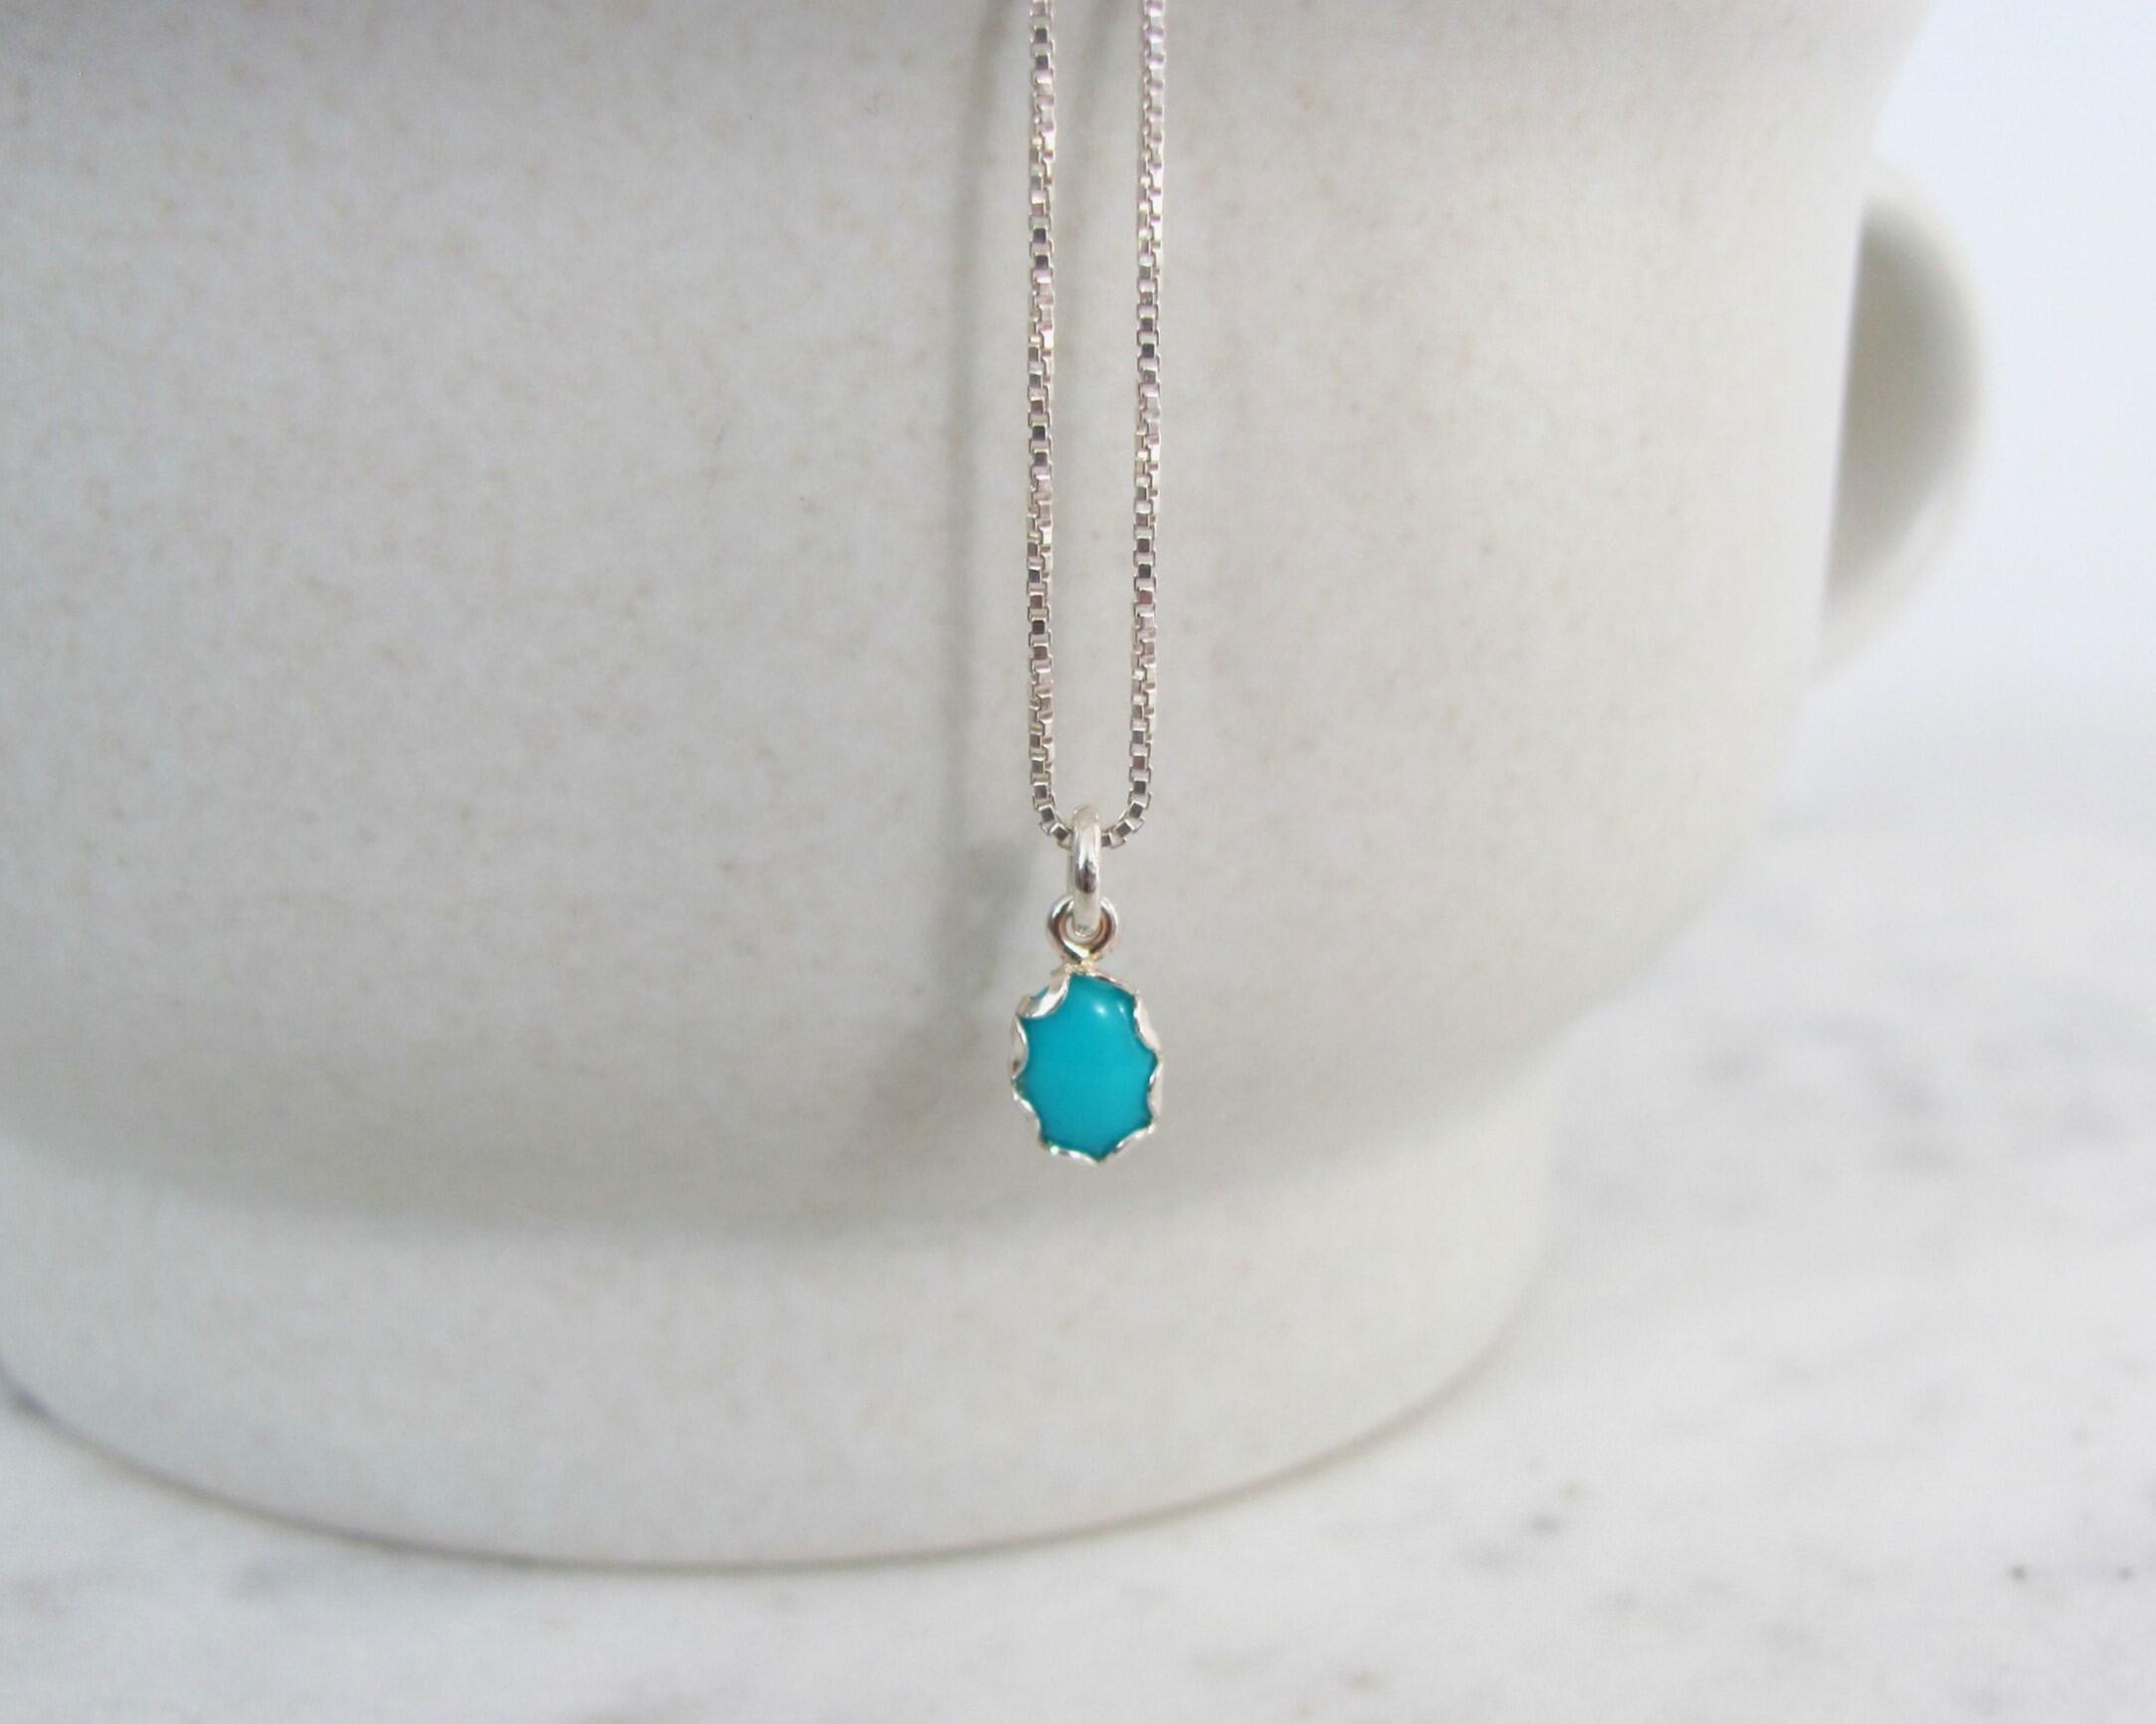 Tiny Arizona Turquoise Necklace in Sterling Silver